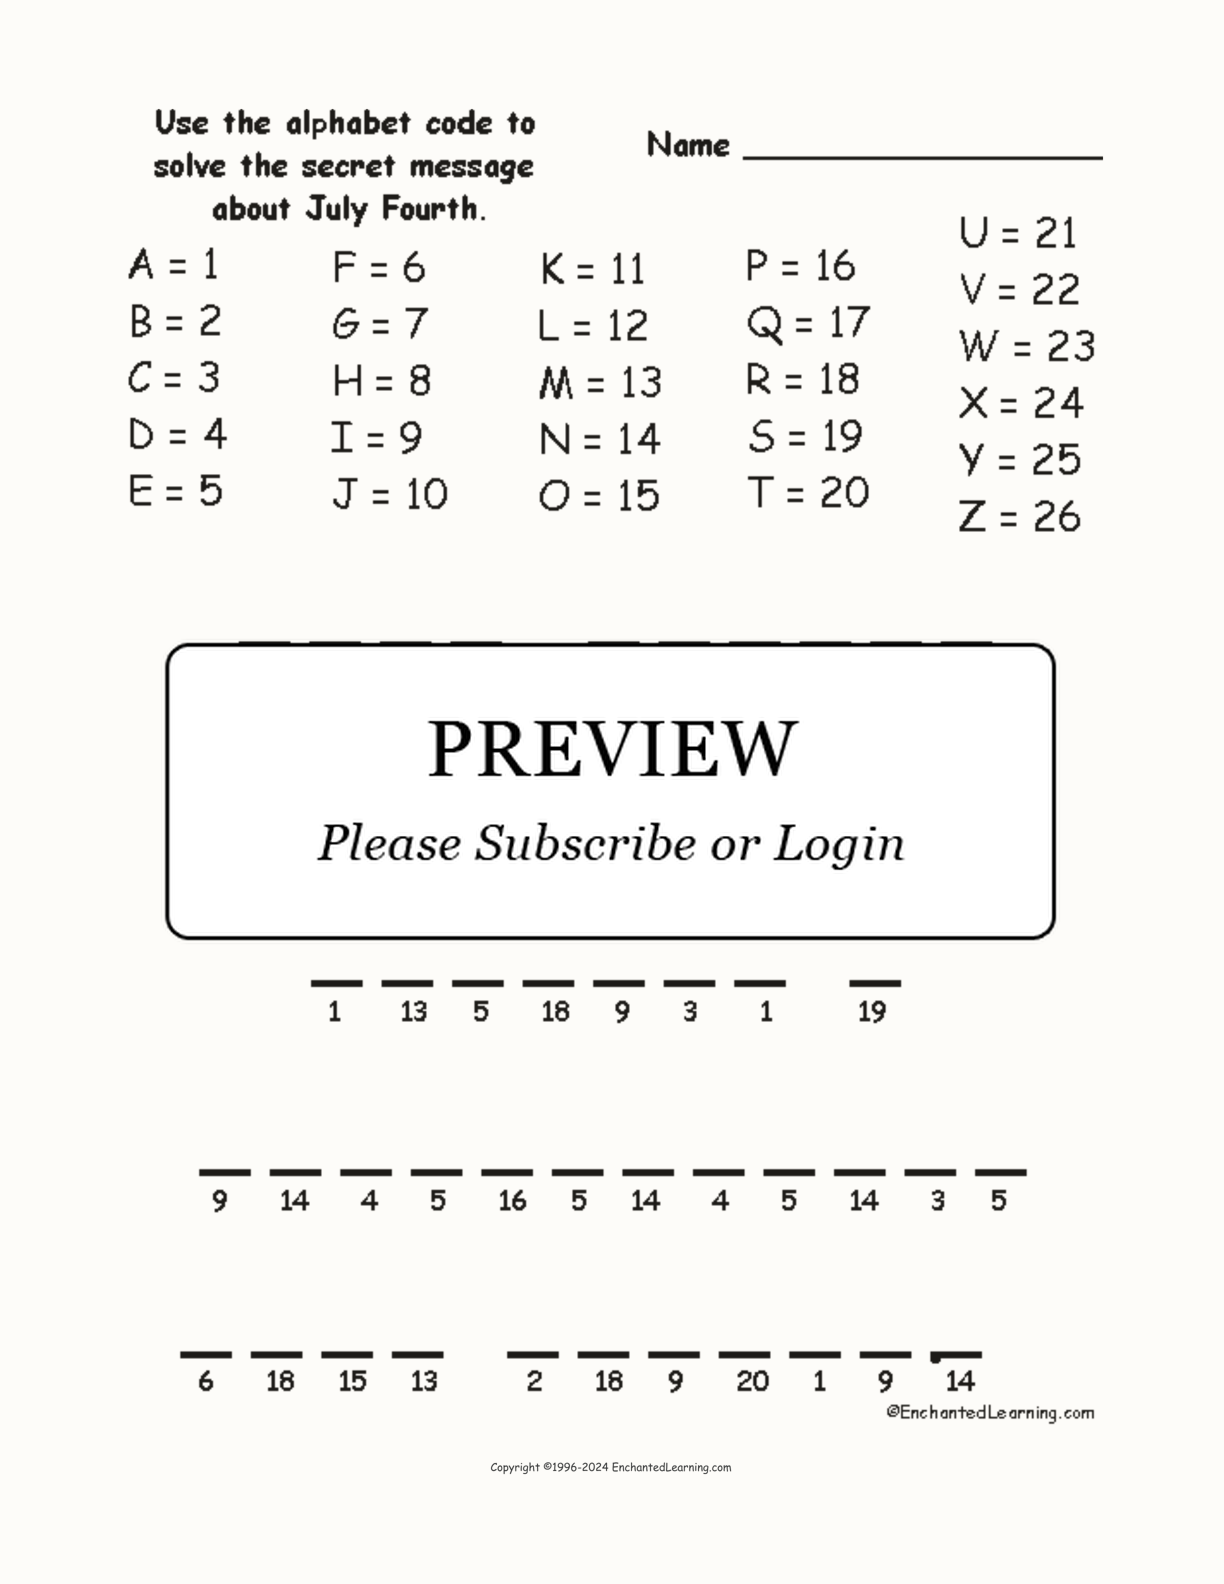 July Fourth Alphabet Code interactive worksheet page 1